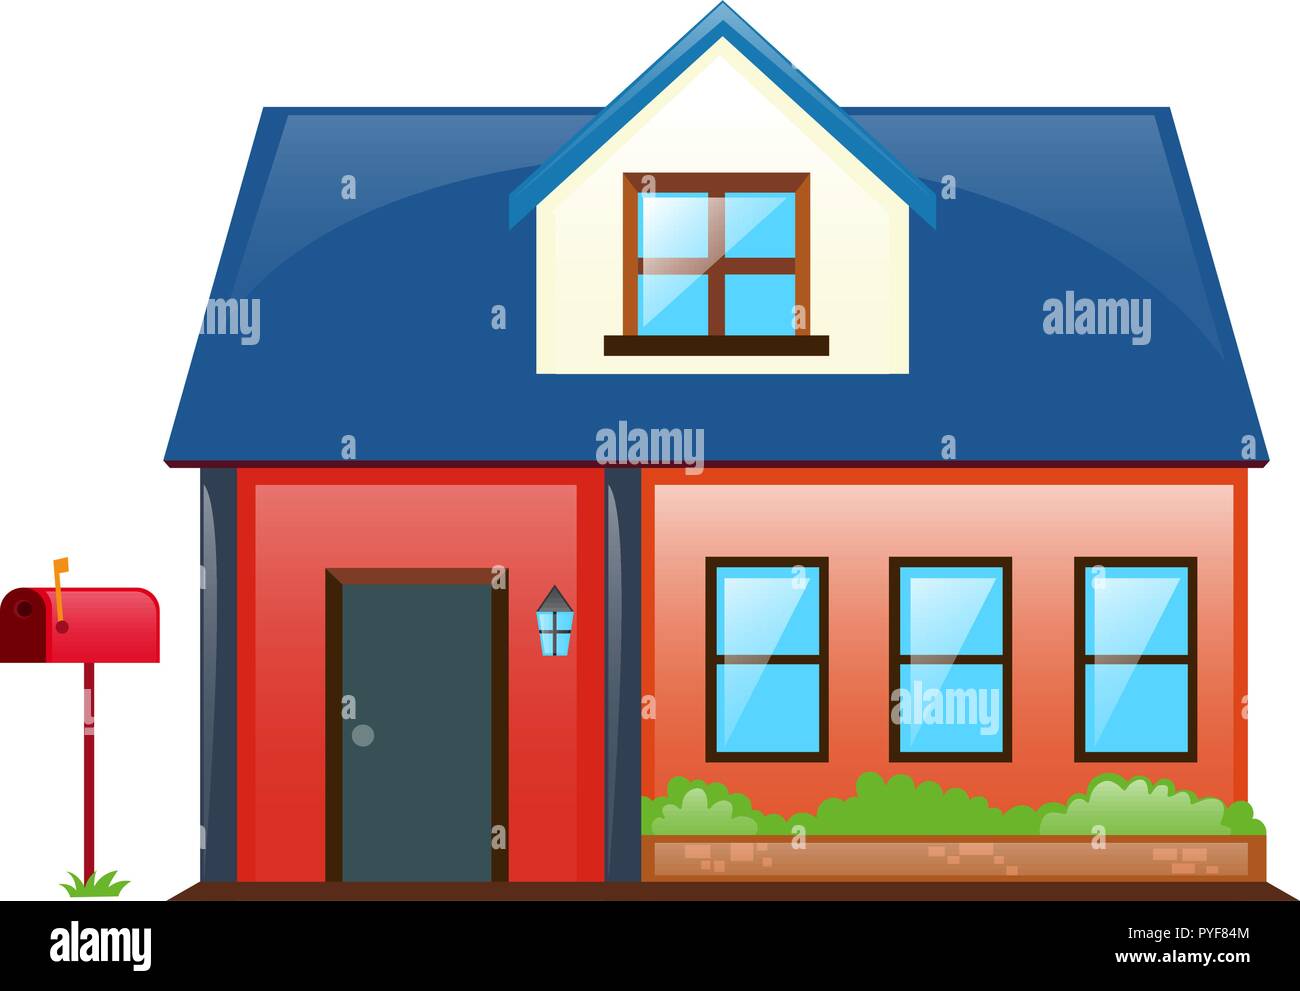 House painted red with blue roof illustration Stock Vector